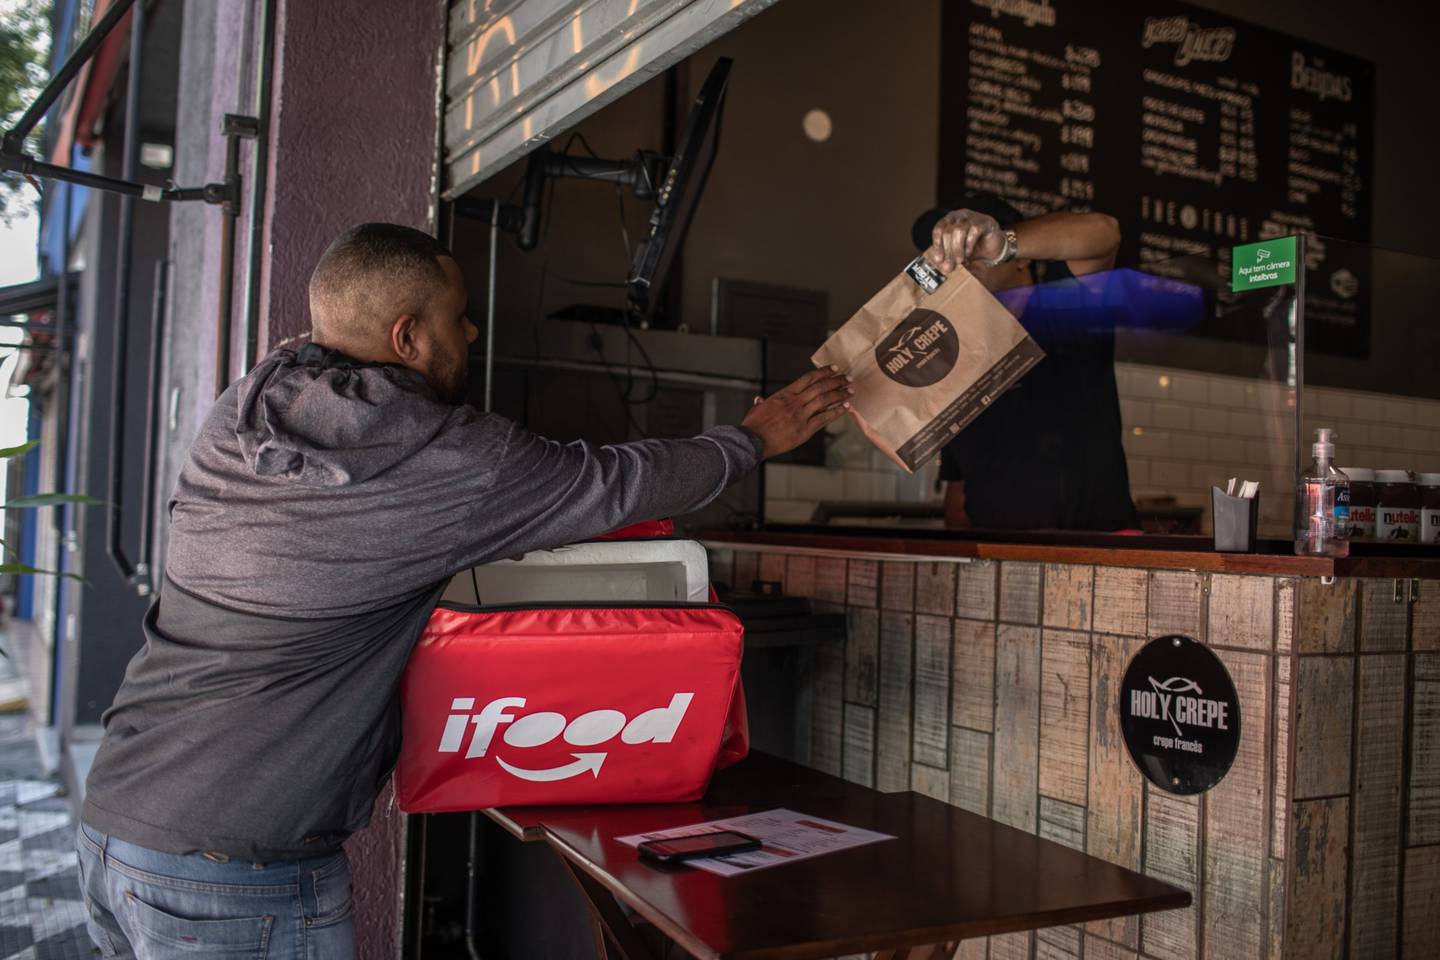 A worker picks up food from a restaurant to make an iFood app delivery in Sao Paulo, Brazil, on Wednesday, April 1, 2020.